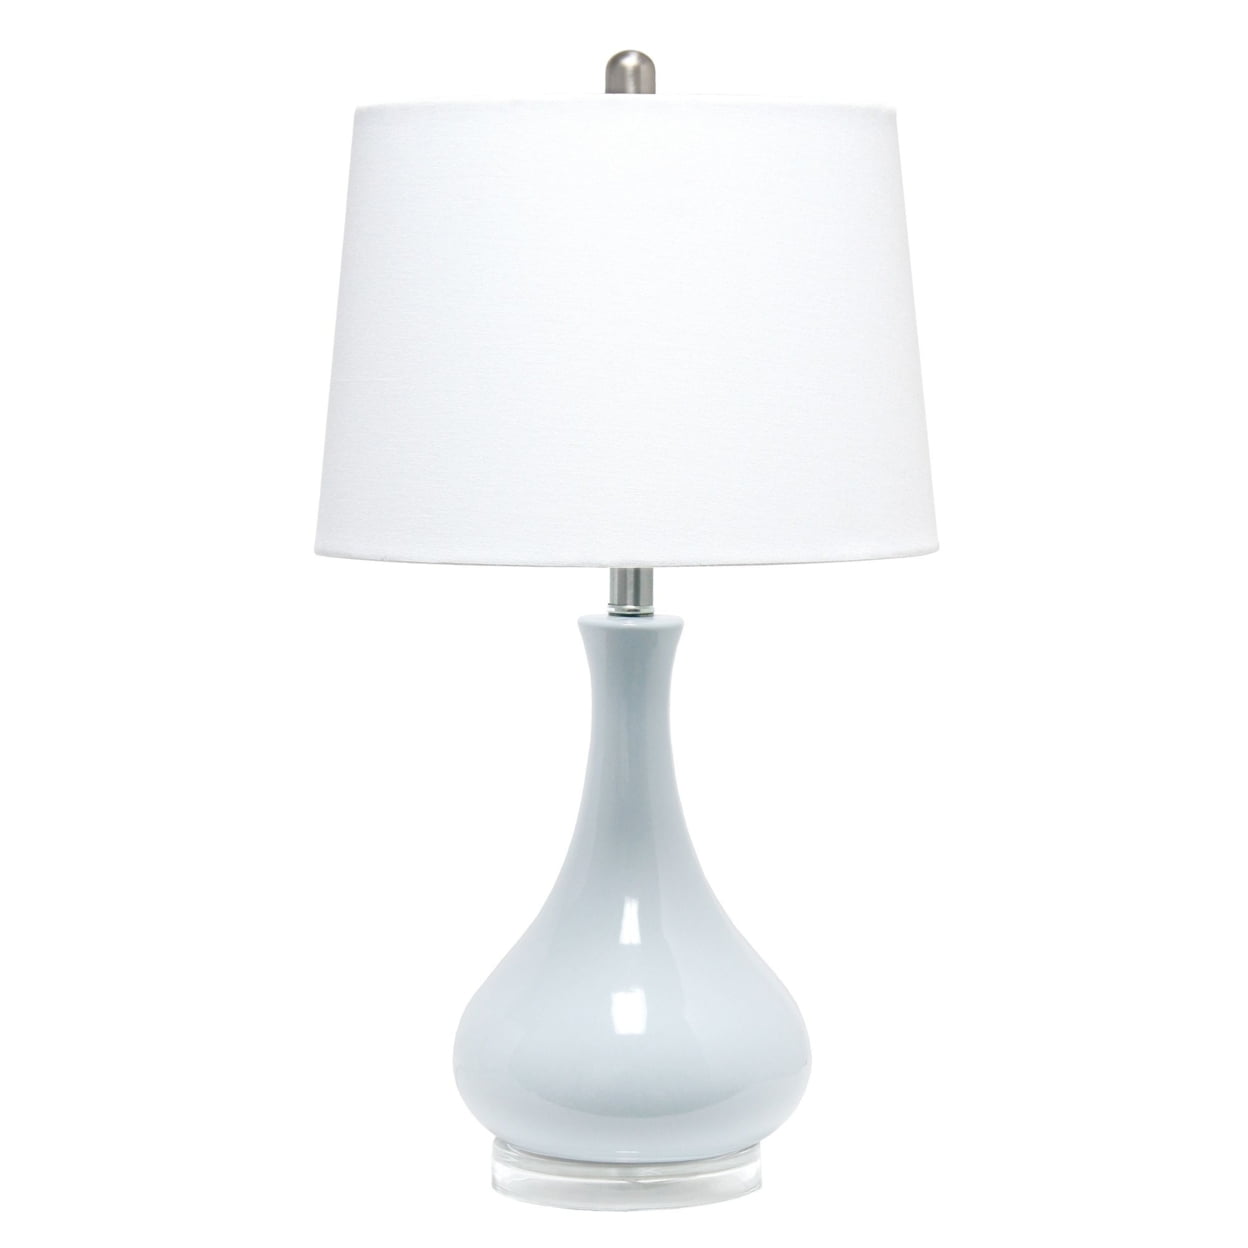 Lalia Home Droplet Table Lamp with Fabric Shade, Light Blue